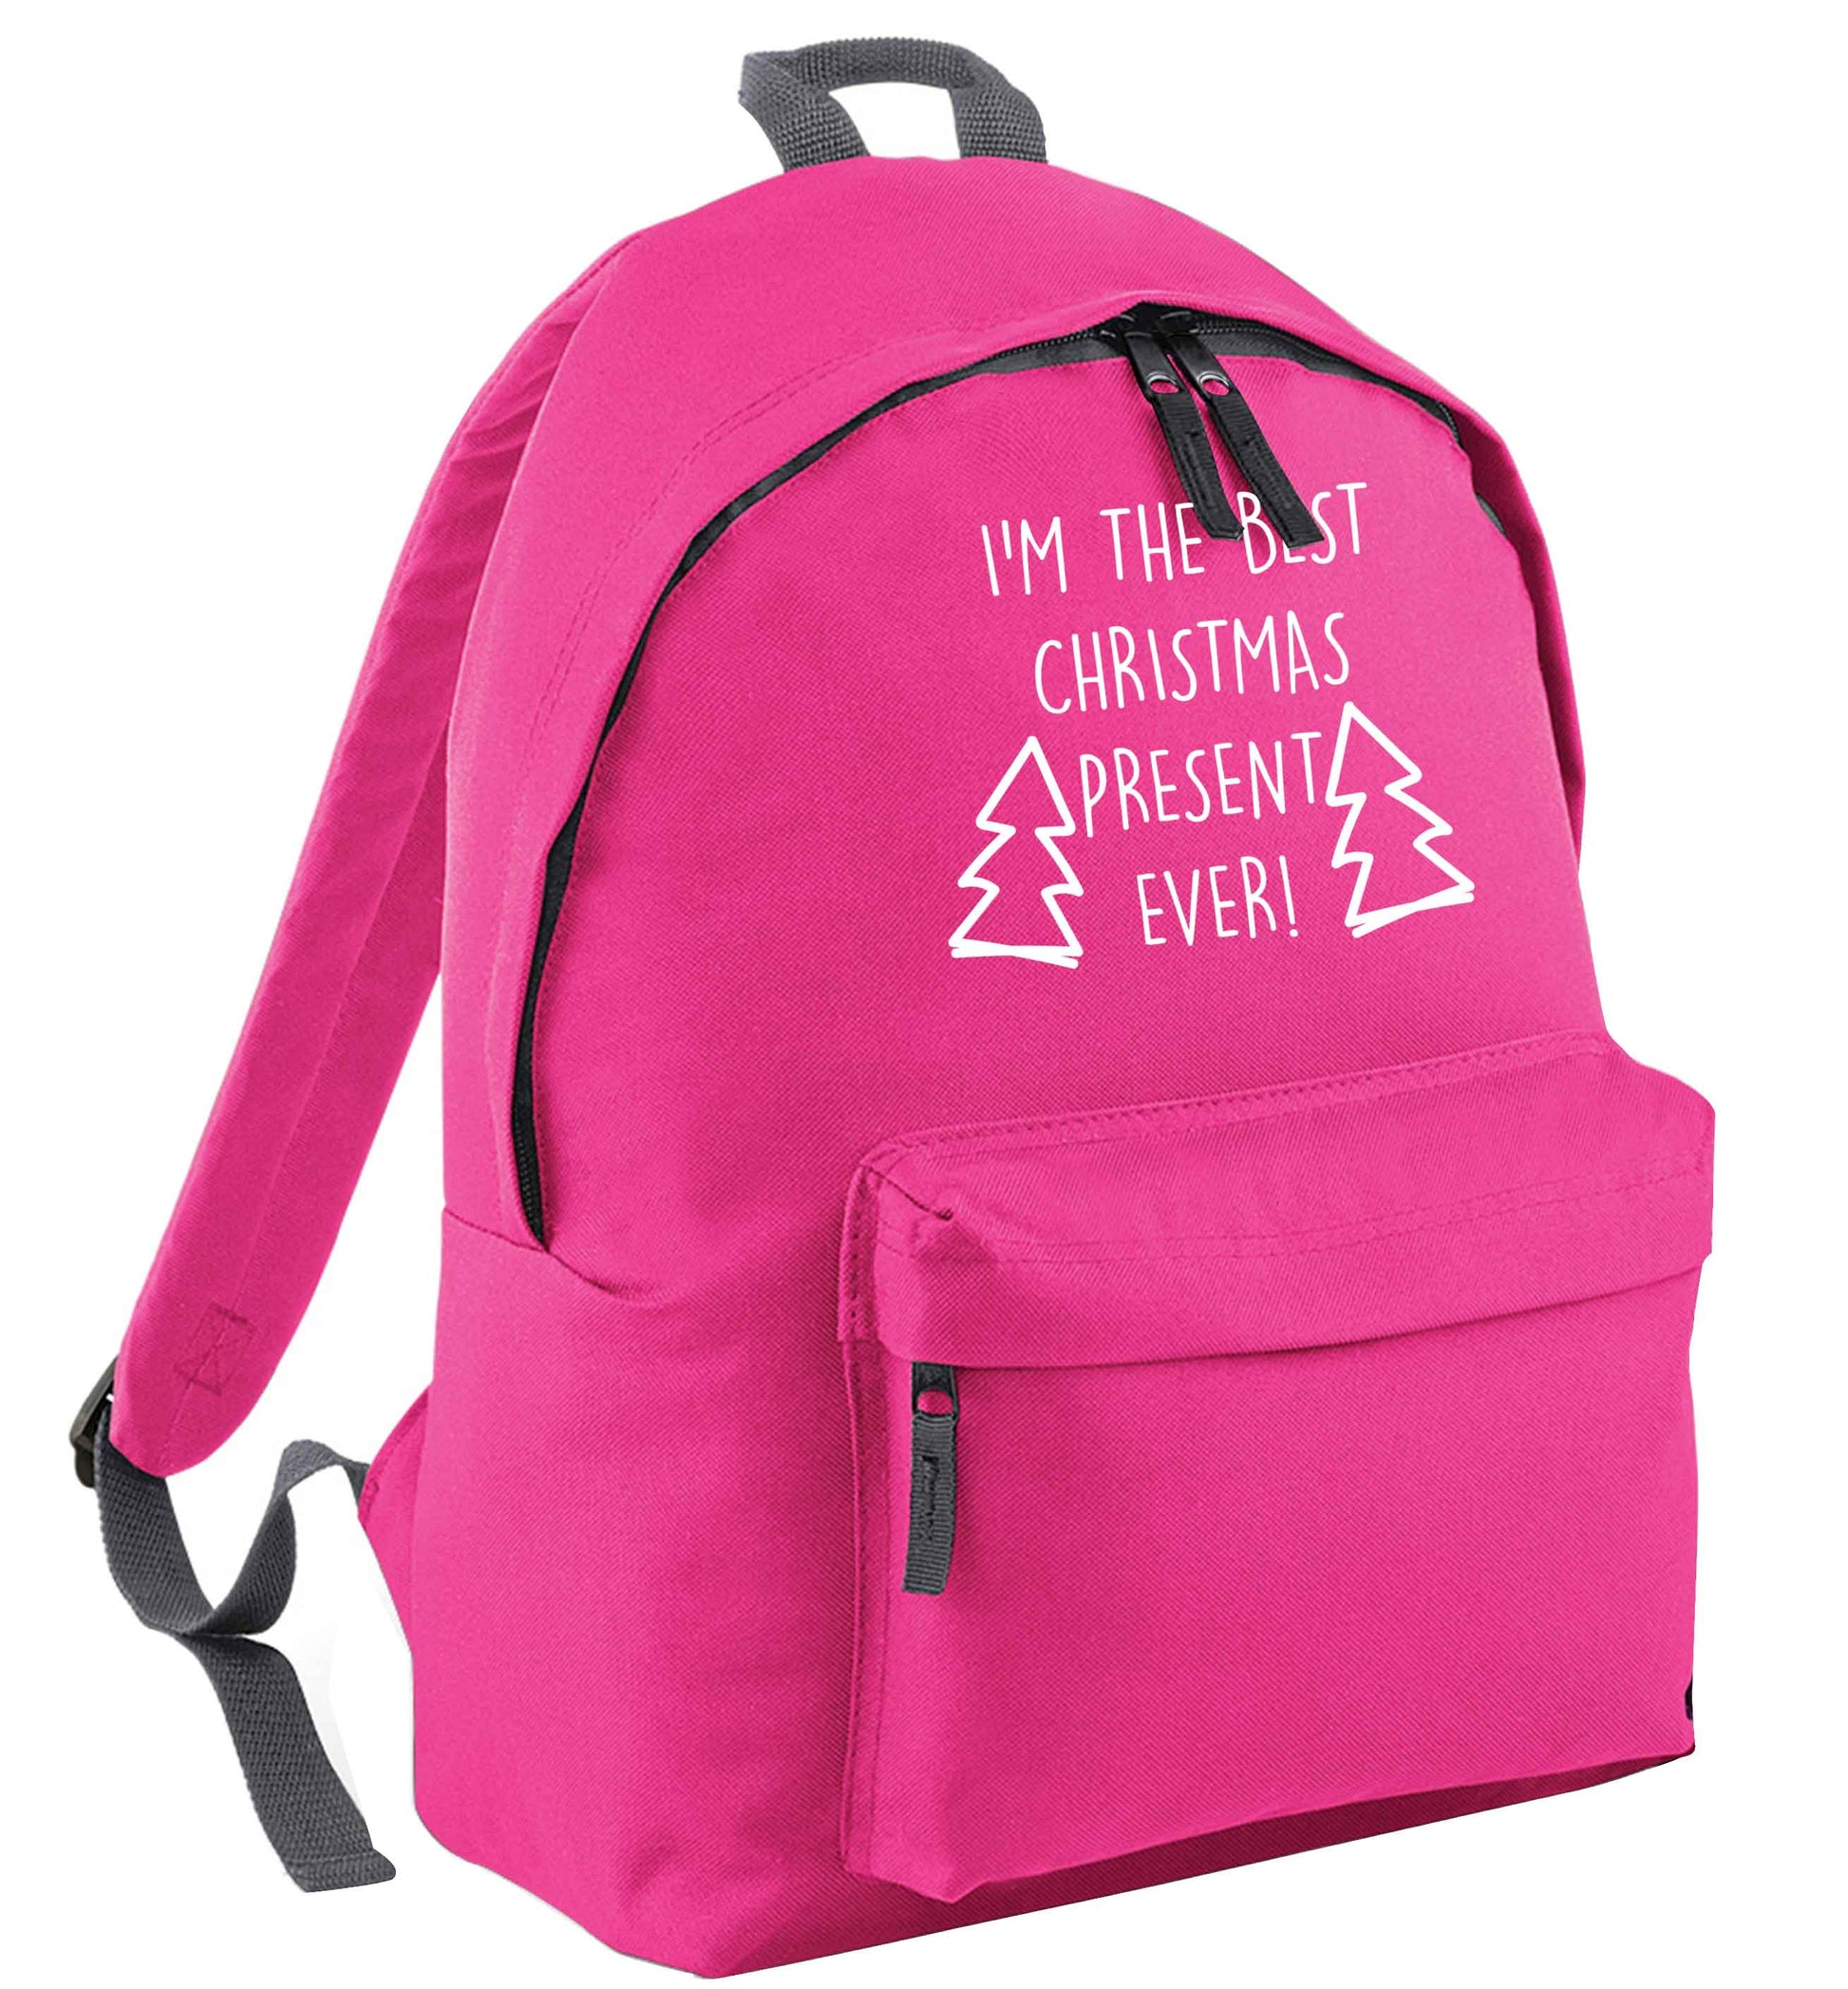 I'm the best Christmas present ever pink adults backpack